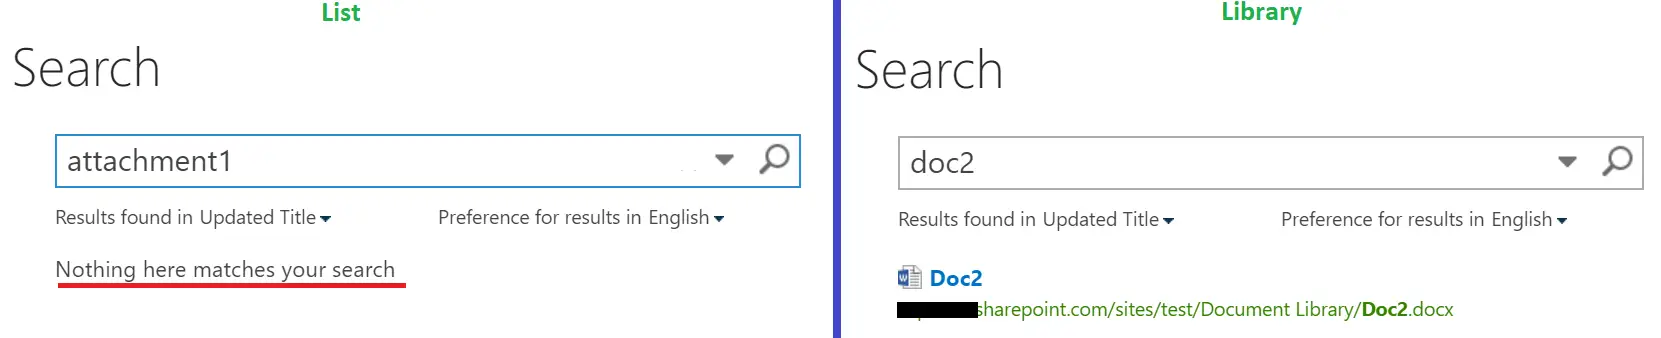 list vs library dcoument in search results